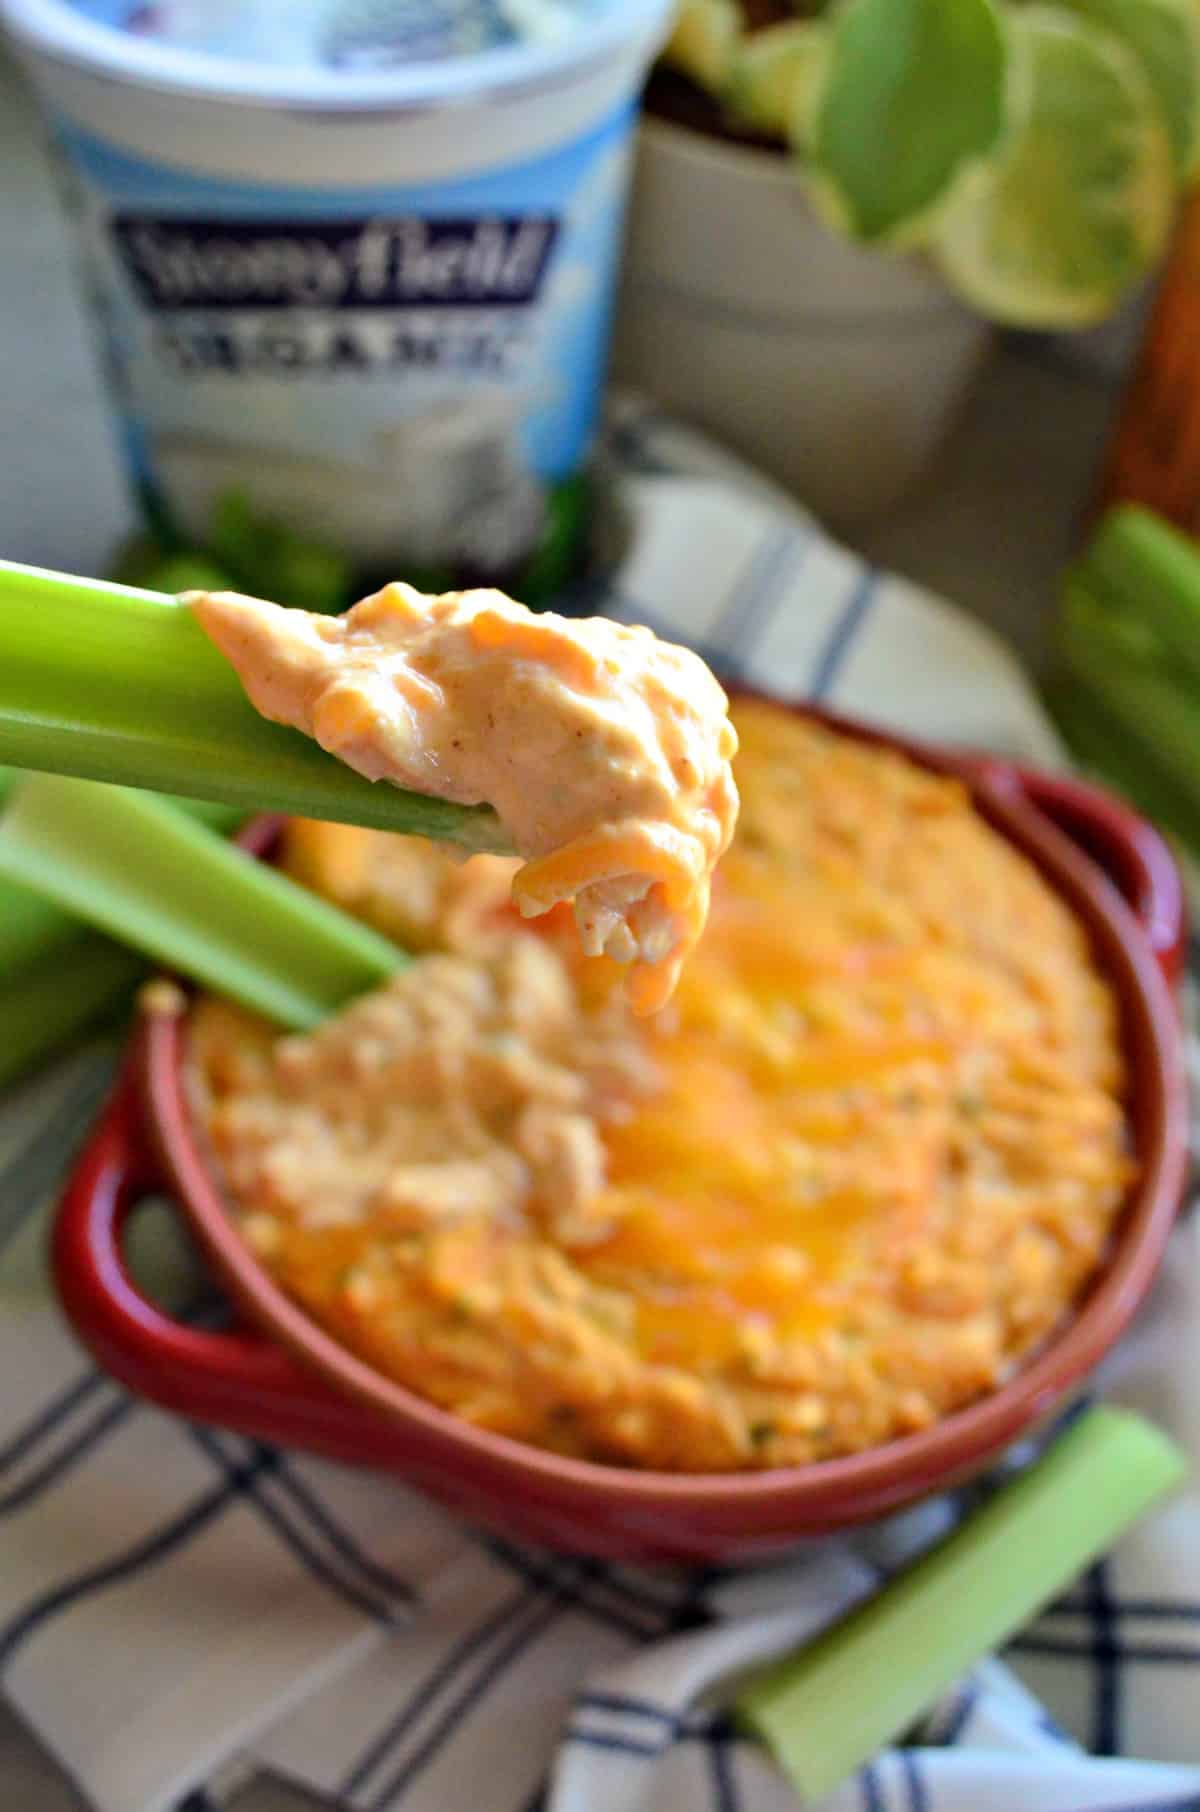 close up of dipped piece of celery with thick orange cheesy dip on it.